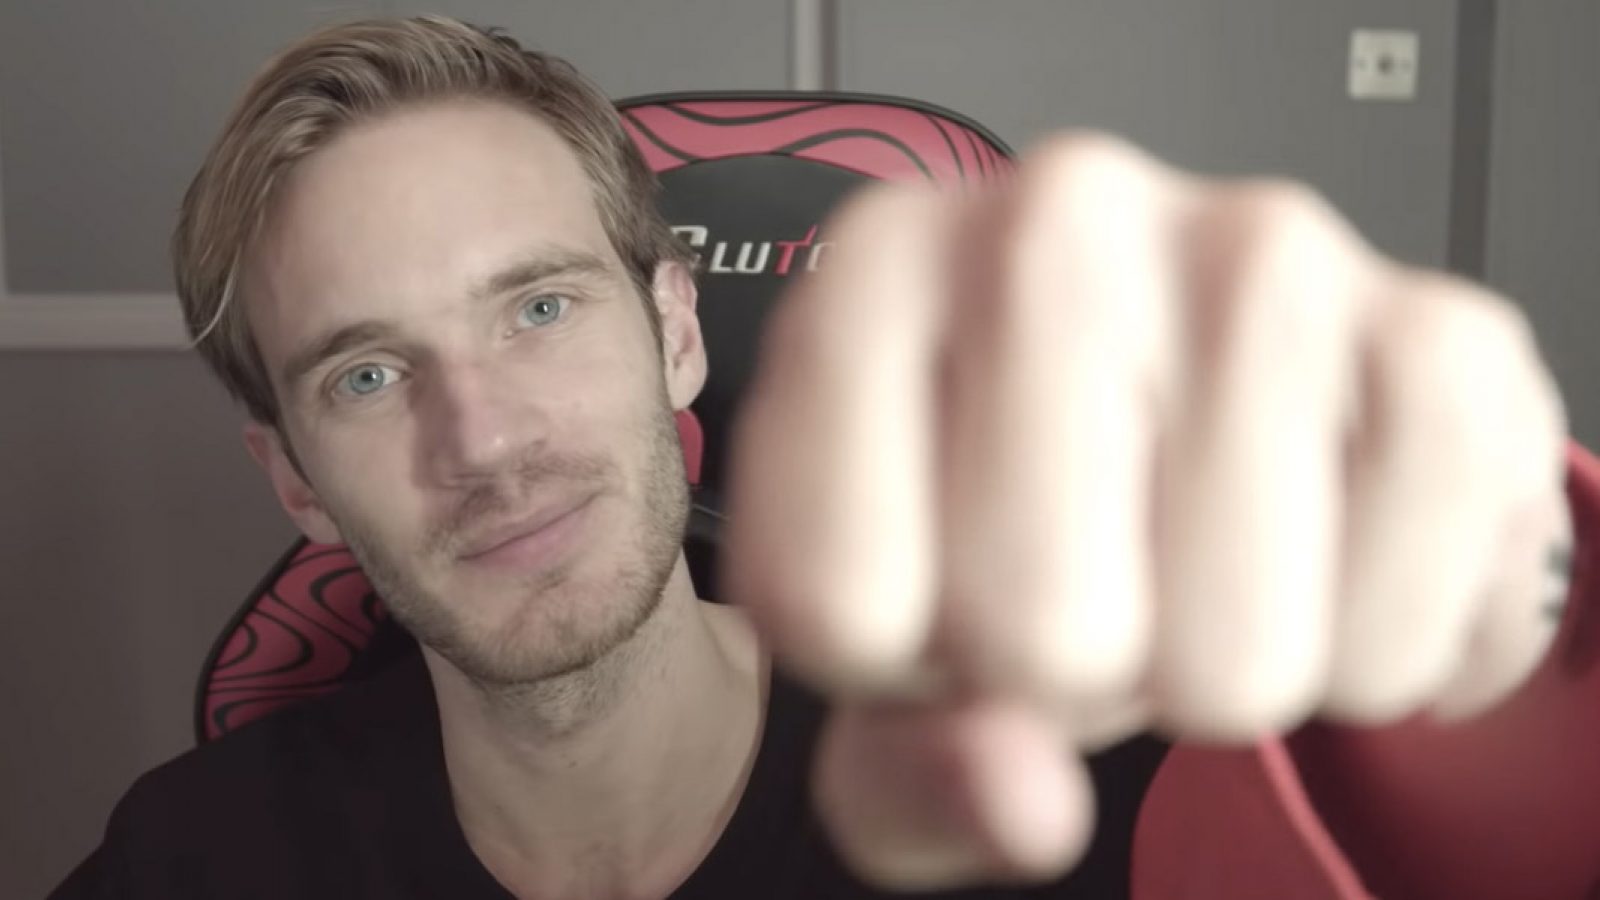 pewdiepie-finally-reacts-to-100-million-youtube-subscribers.jpg